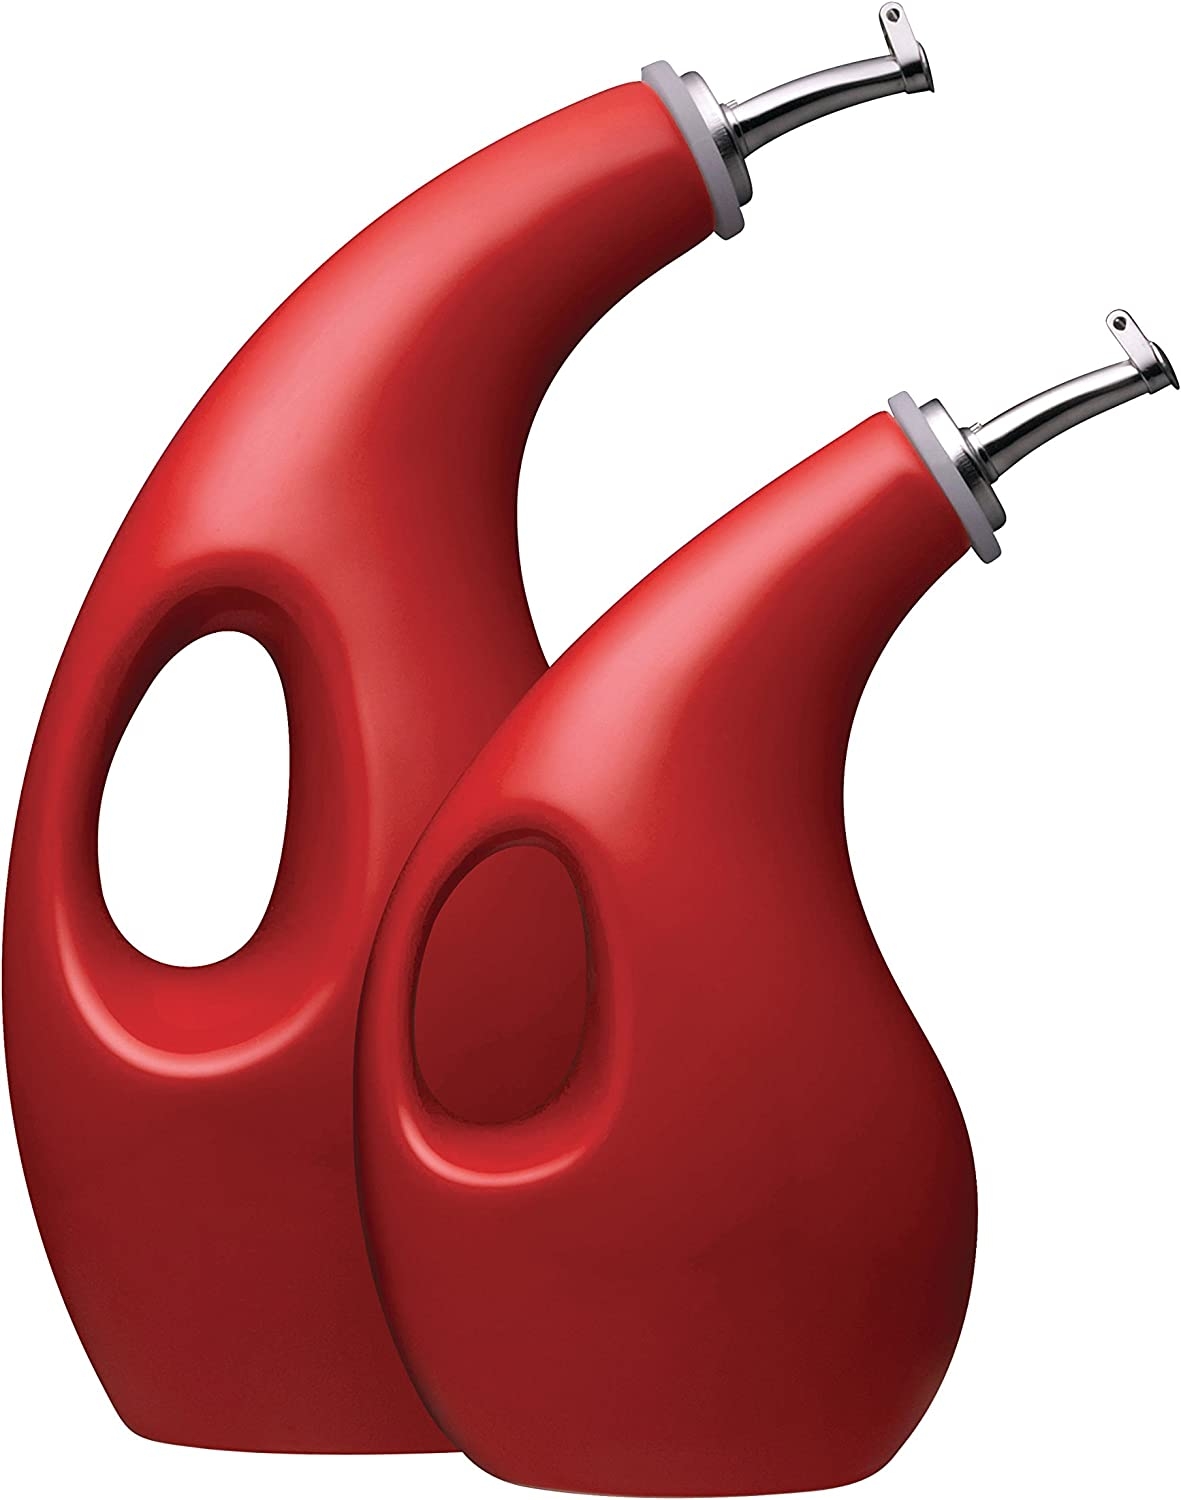 Rachael Ray Solid Glaze Ceramics EVOO Olive Oil Bottle Dispenser with Spout Set, 2 Piece, Red Import To Shop ×Product